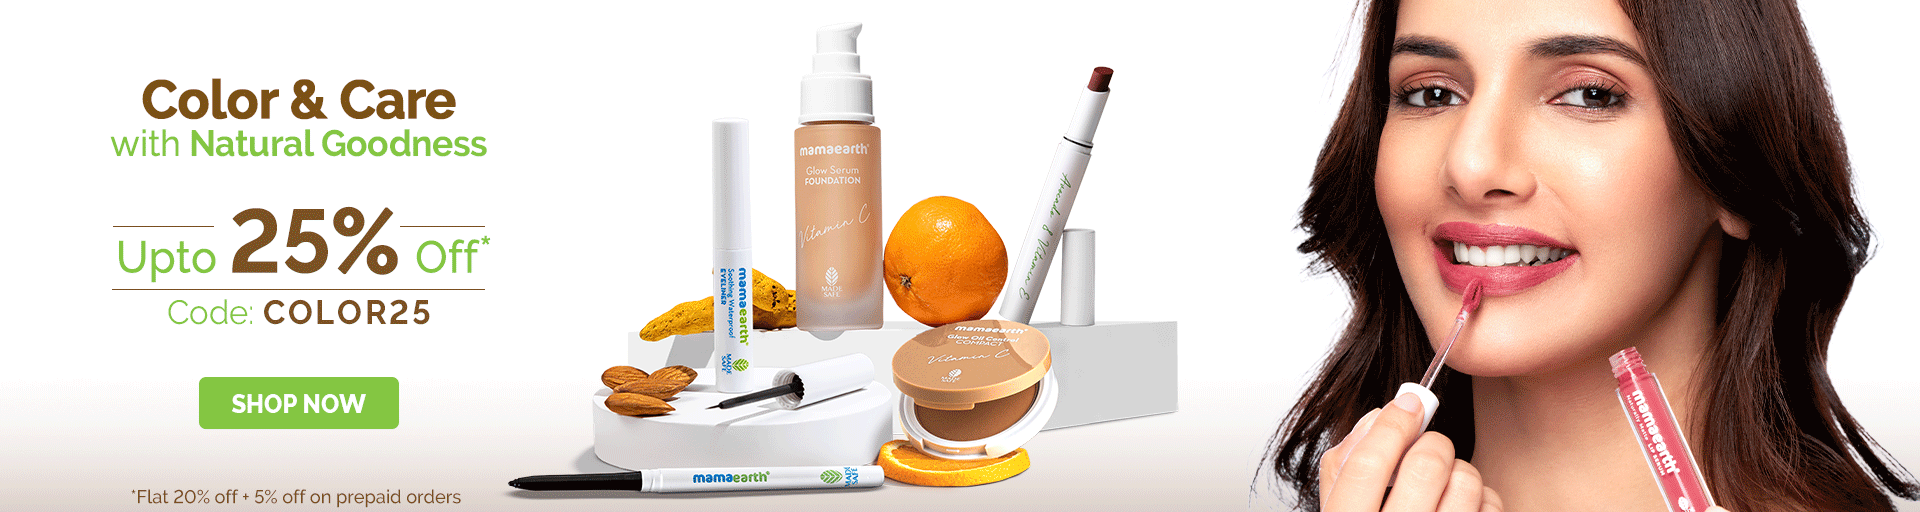 Mama Earth - Get Up To 25% Off on Colorcare Range